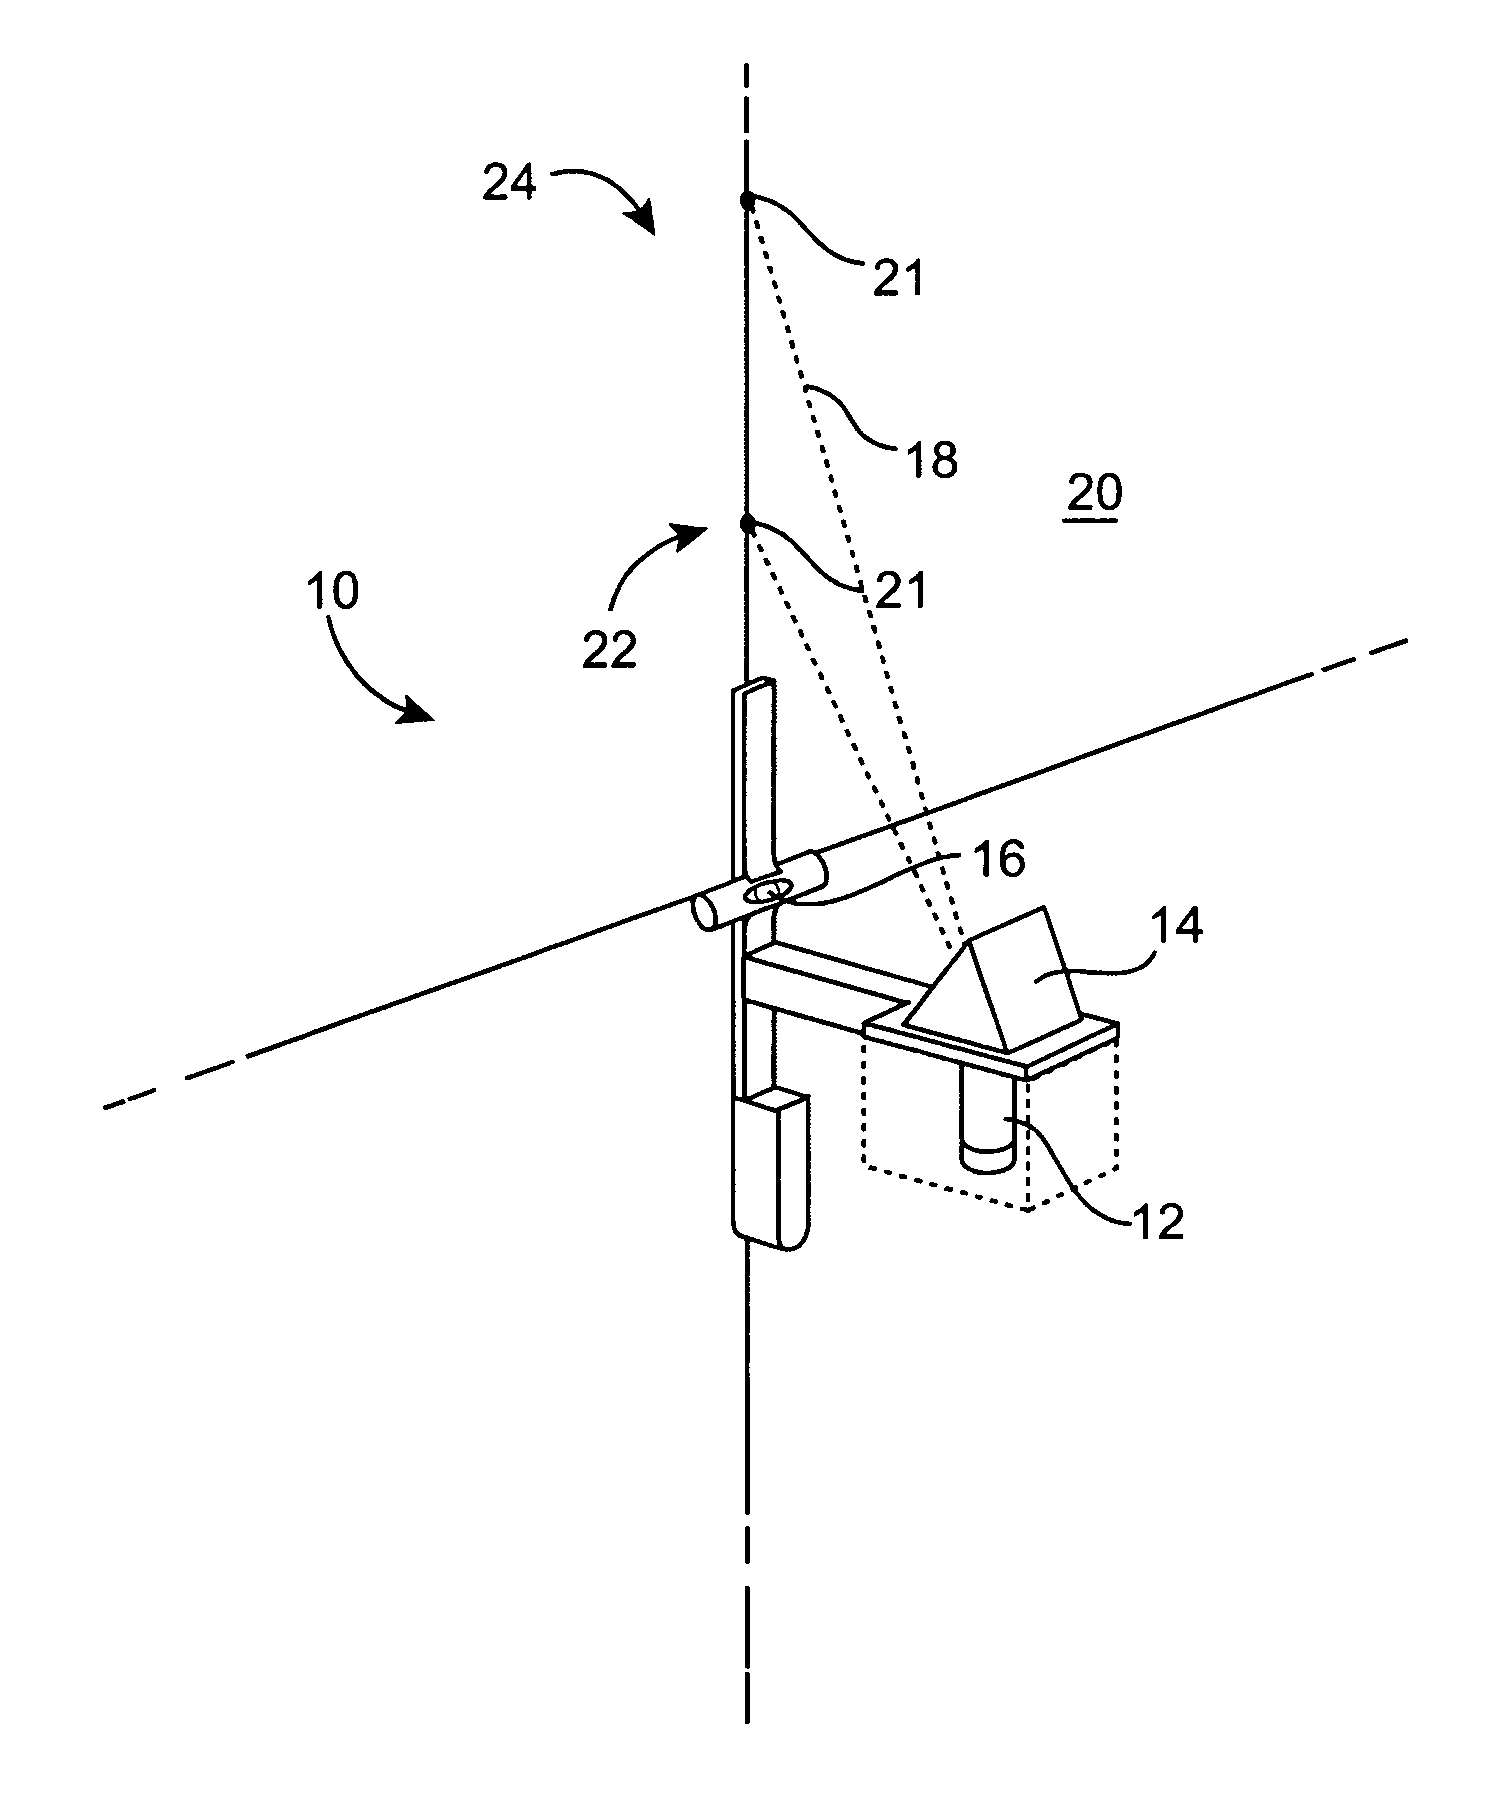 Device for graphically showing a schedule